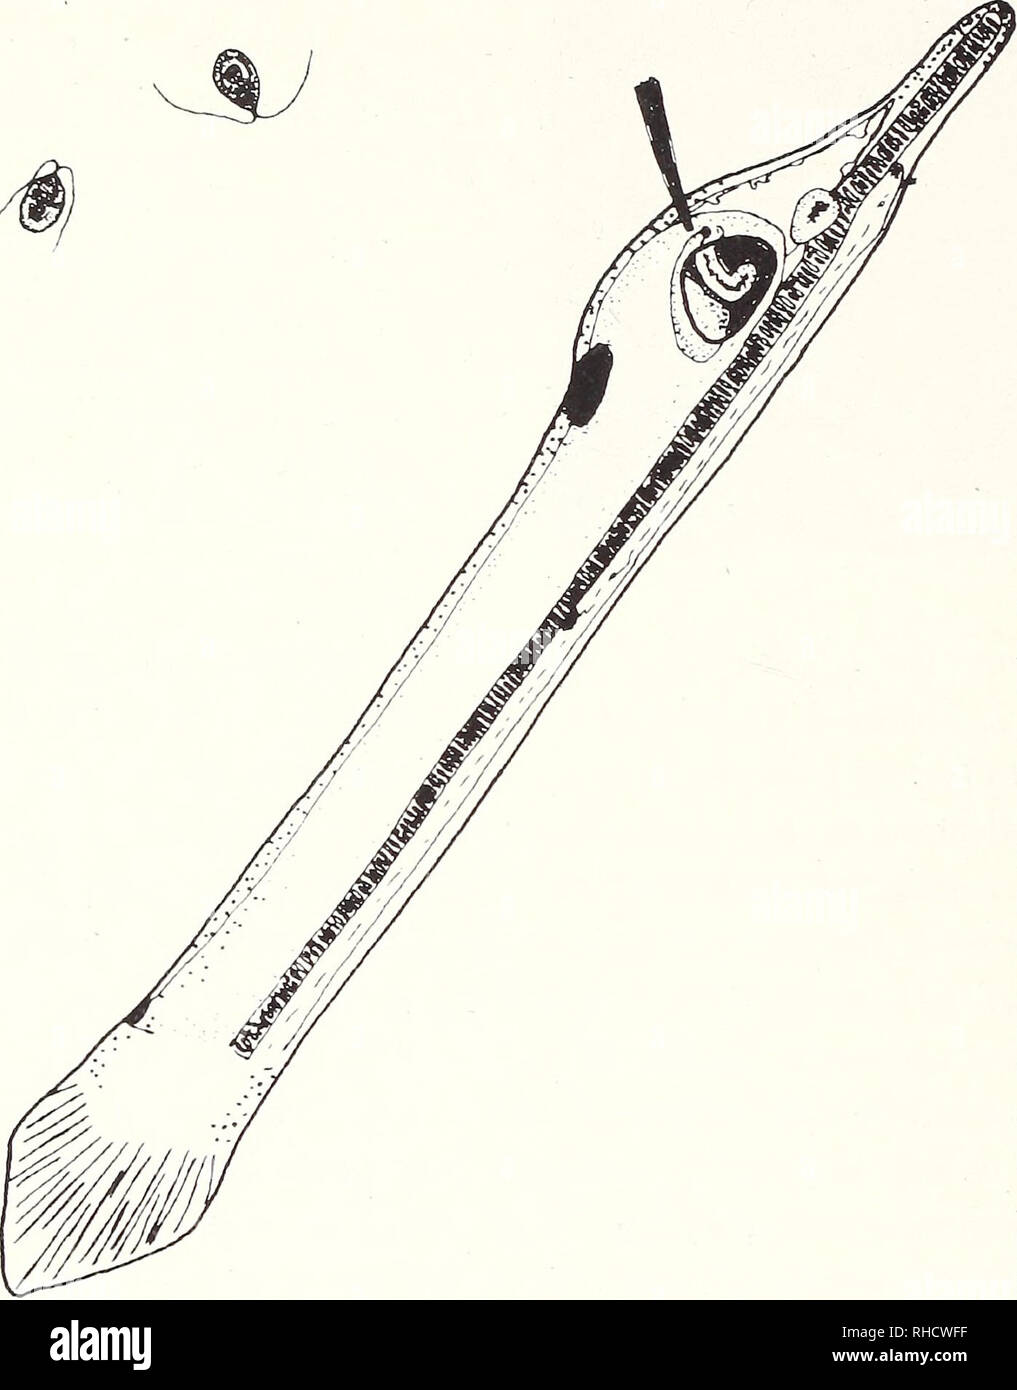 . Bonner zoologische Monographien. Zoology. 10. Fig.3: Line drawing of a lateral aspect of an early larva of Branchiostoma lanceolatiim (ca. llOh post-fertilization, 18°C). Nonnal feeding posi- tion: the long axis of the body is at an angle of about 60 from horizontal and the anterior end and the ventral surface are directed towards the surface. In the upper left comer two individuals of Diinaliella (Chlorophycaea, Polyblepha- ridaceae), a regular food orga- nism in laboratory cultures of B. lanceolatiim, are depicted. Ontogenetic stage comparable to one shown in Fig.7. planktonic larvae in th Stock Photo